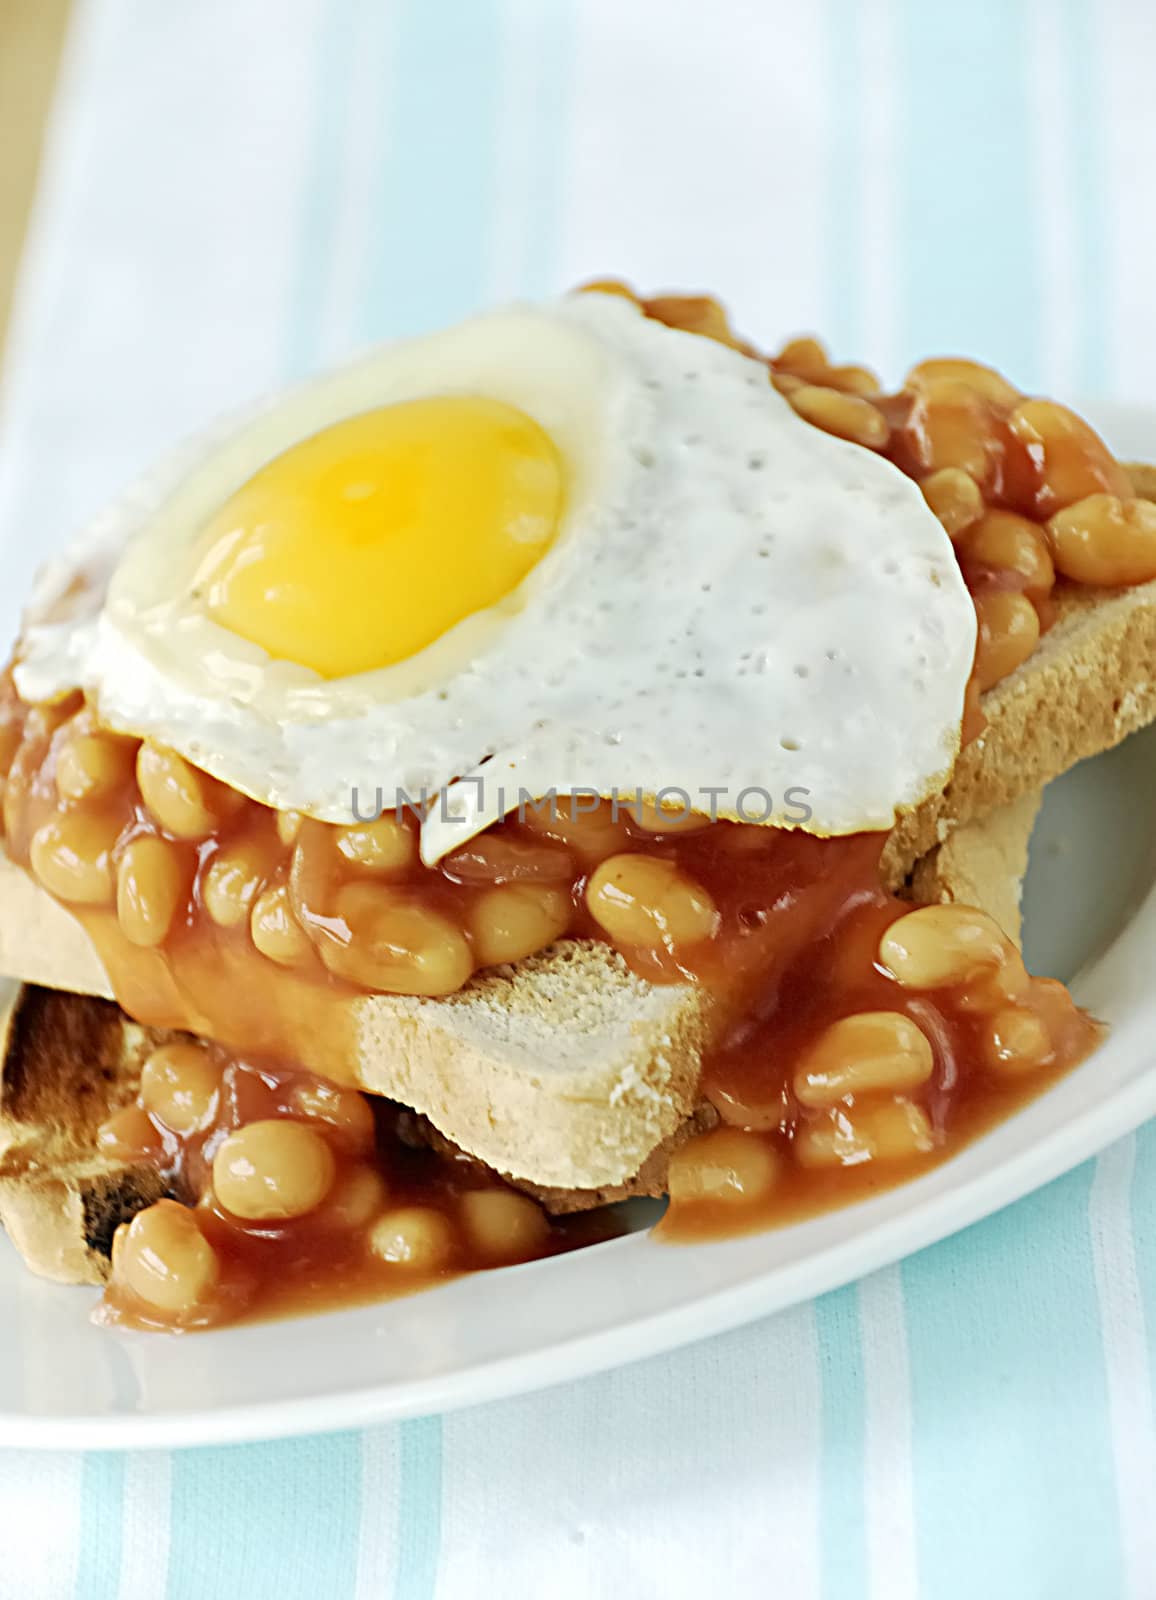 Beans and egg on toast